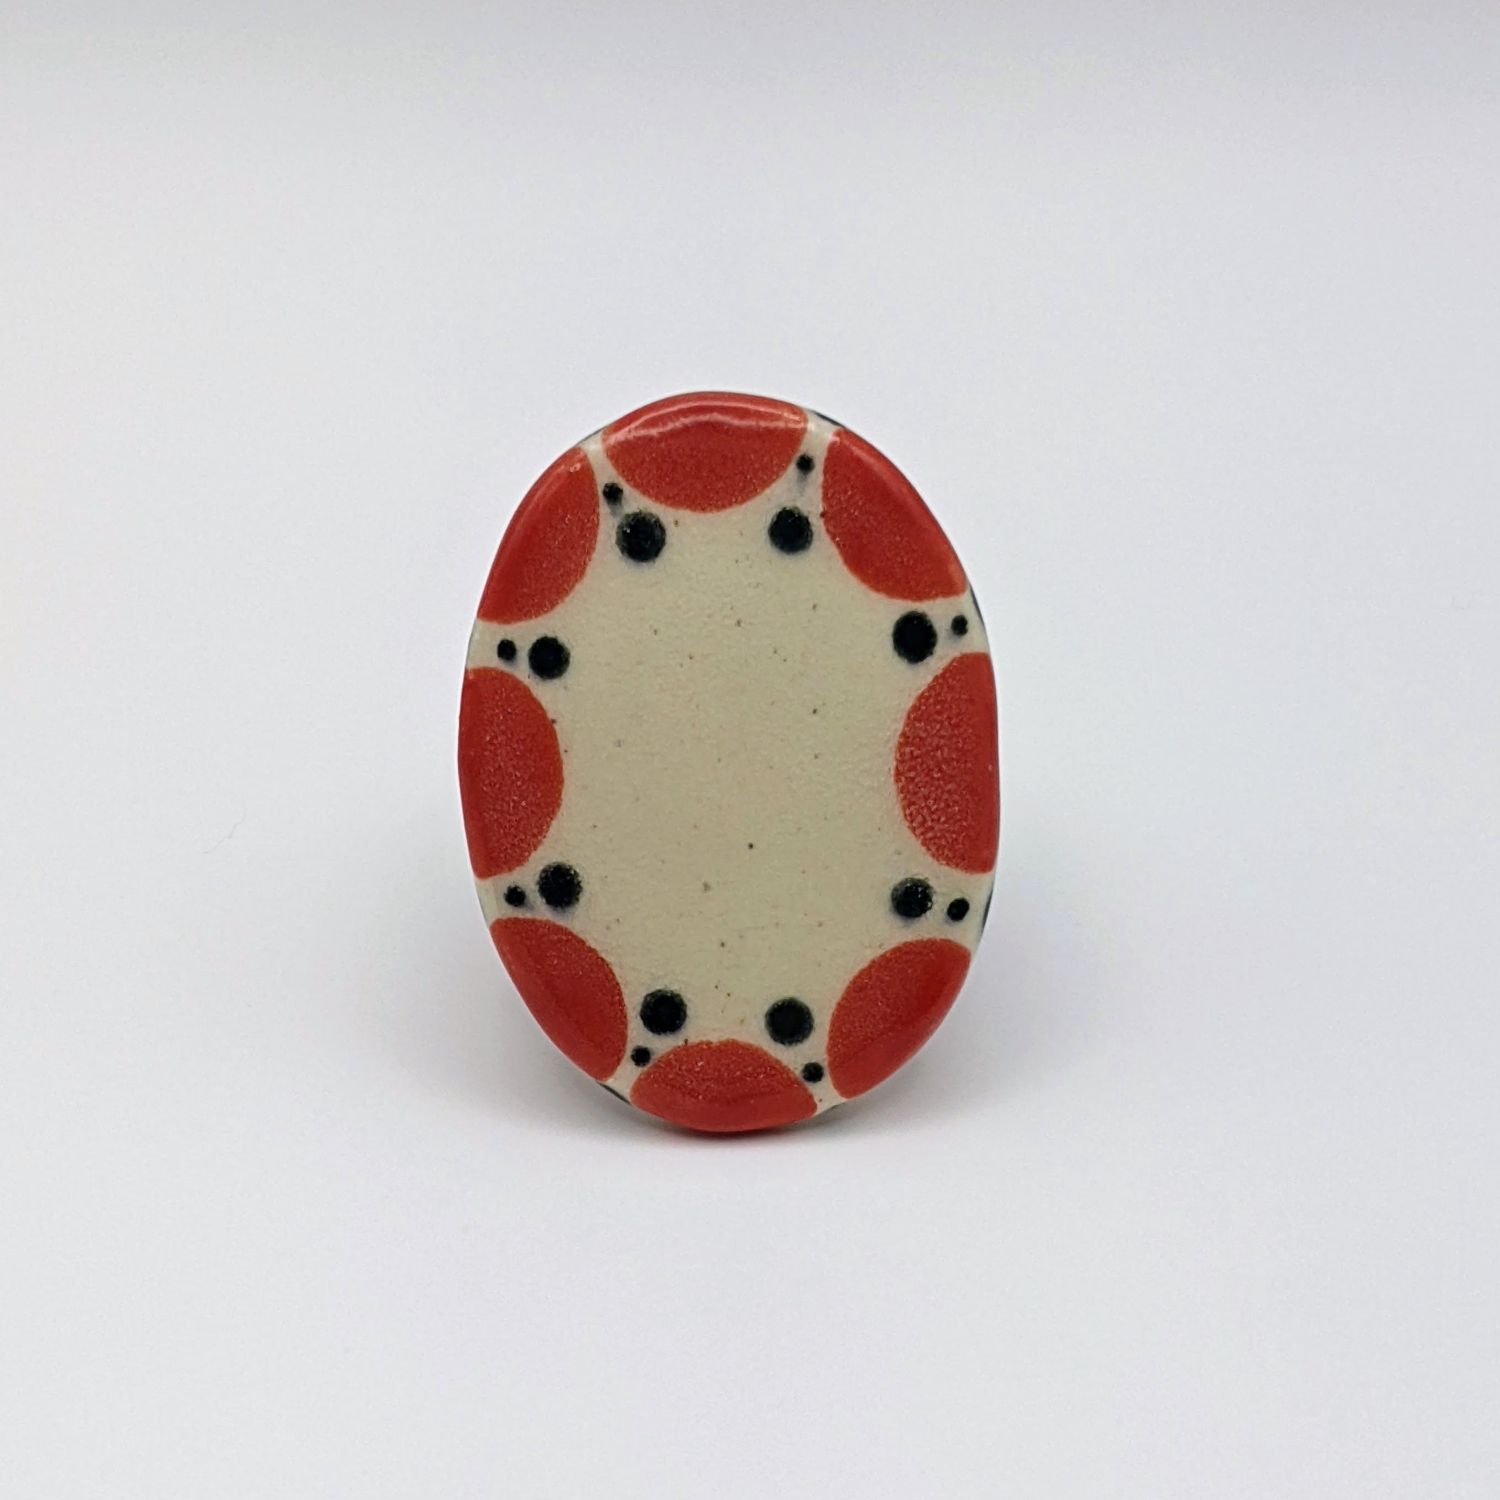 Here and Here: Red and Black Dot Ceramic Ring – Small Product Image 1 of 2